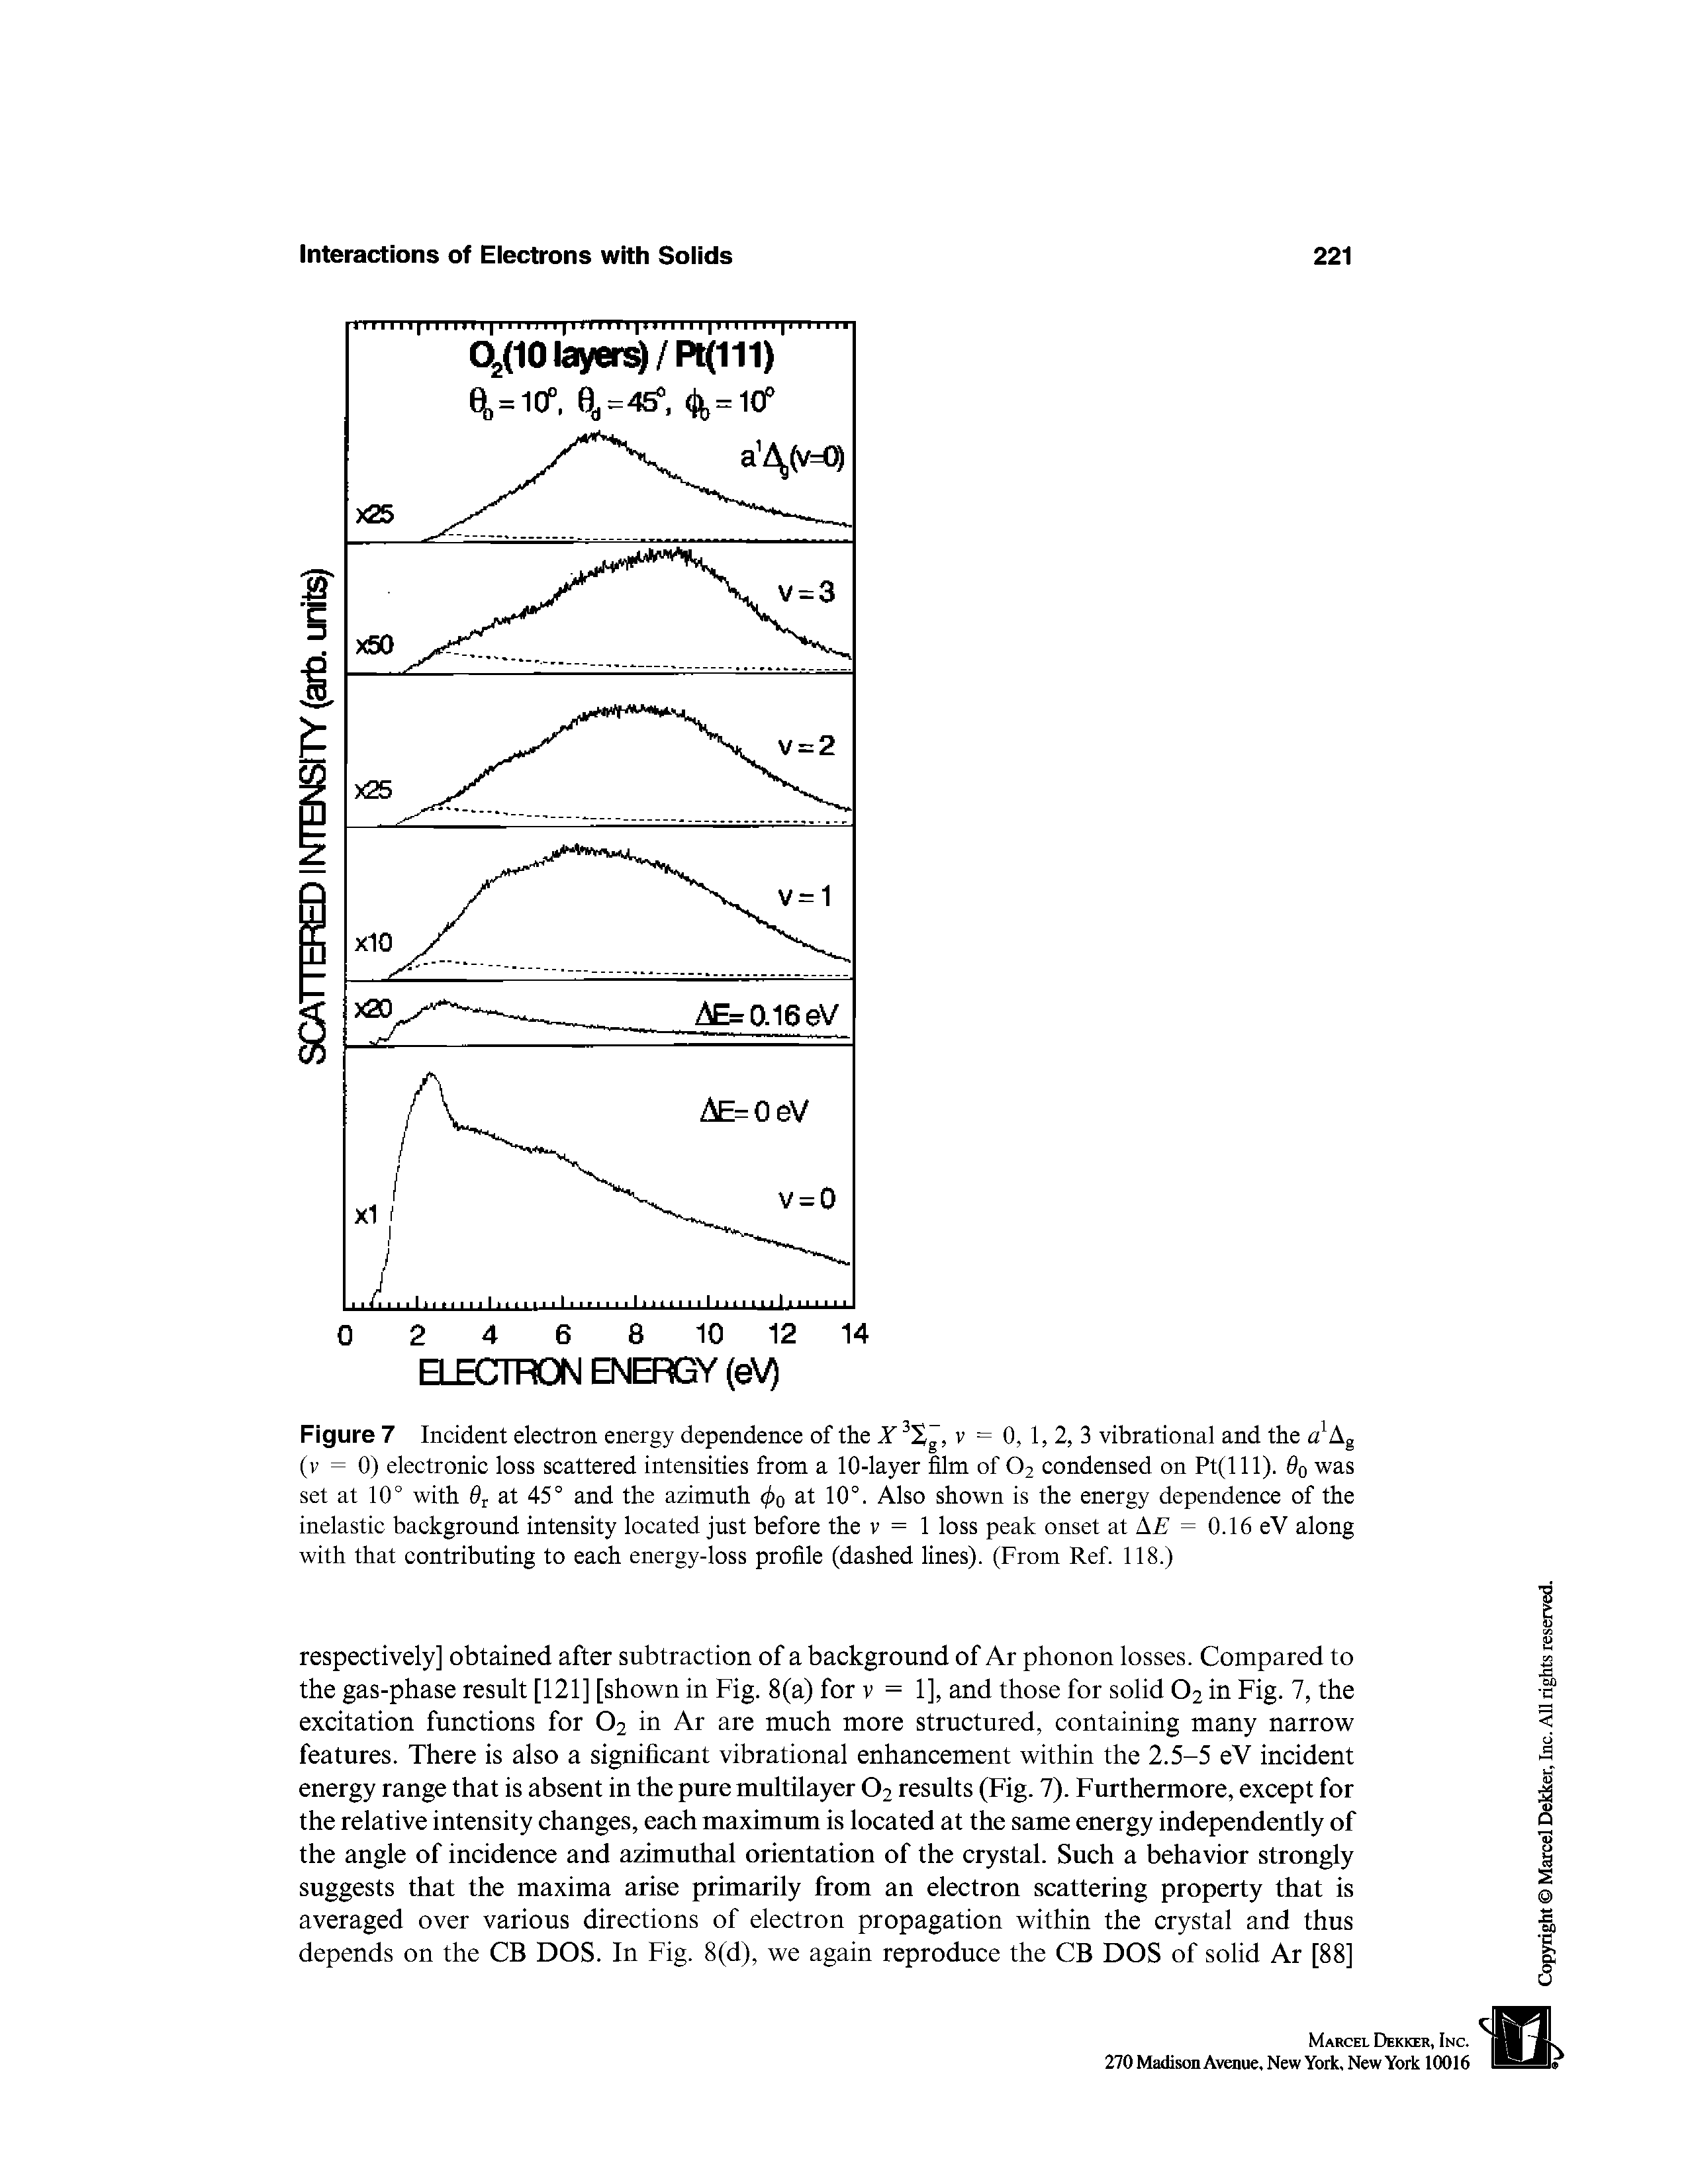 Figure 7 Incident electron energy dependence of the X v = 0, 1, 2, 3 vibrational and the a Ag (v = 0) electronic loss scattered intensities from a 10-layer film of O2 condensed on Pt(lll). was set at 10° with 6 at 45° and the azimuth at 10°. Also shown is the energy dependence of the inelastic background intensity located just before the v = 1 loss peak onset at Aif = 0.16 eV along with that contributing to each energy-loss profile (dashed lines). (From Ref. 118.)...